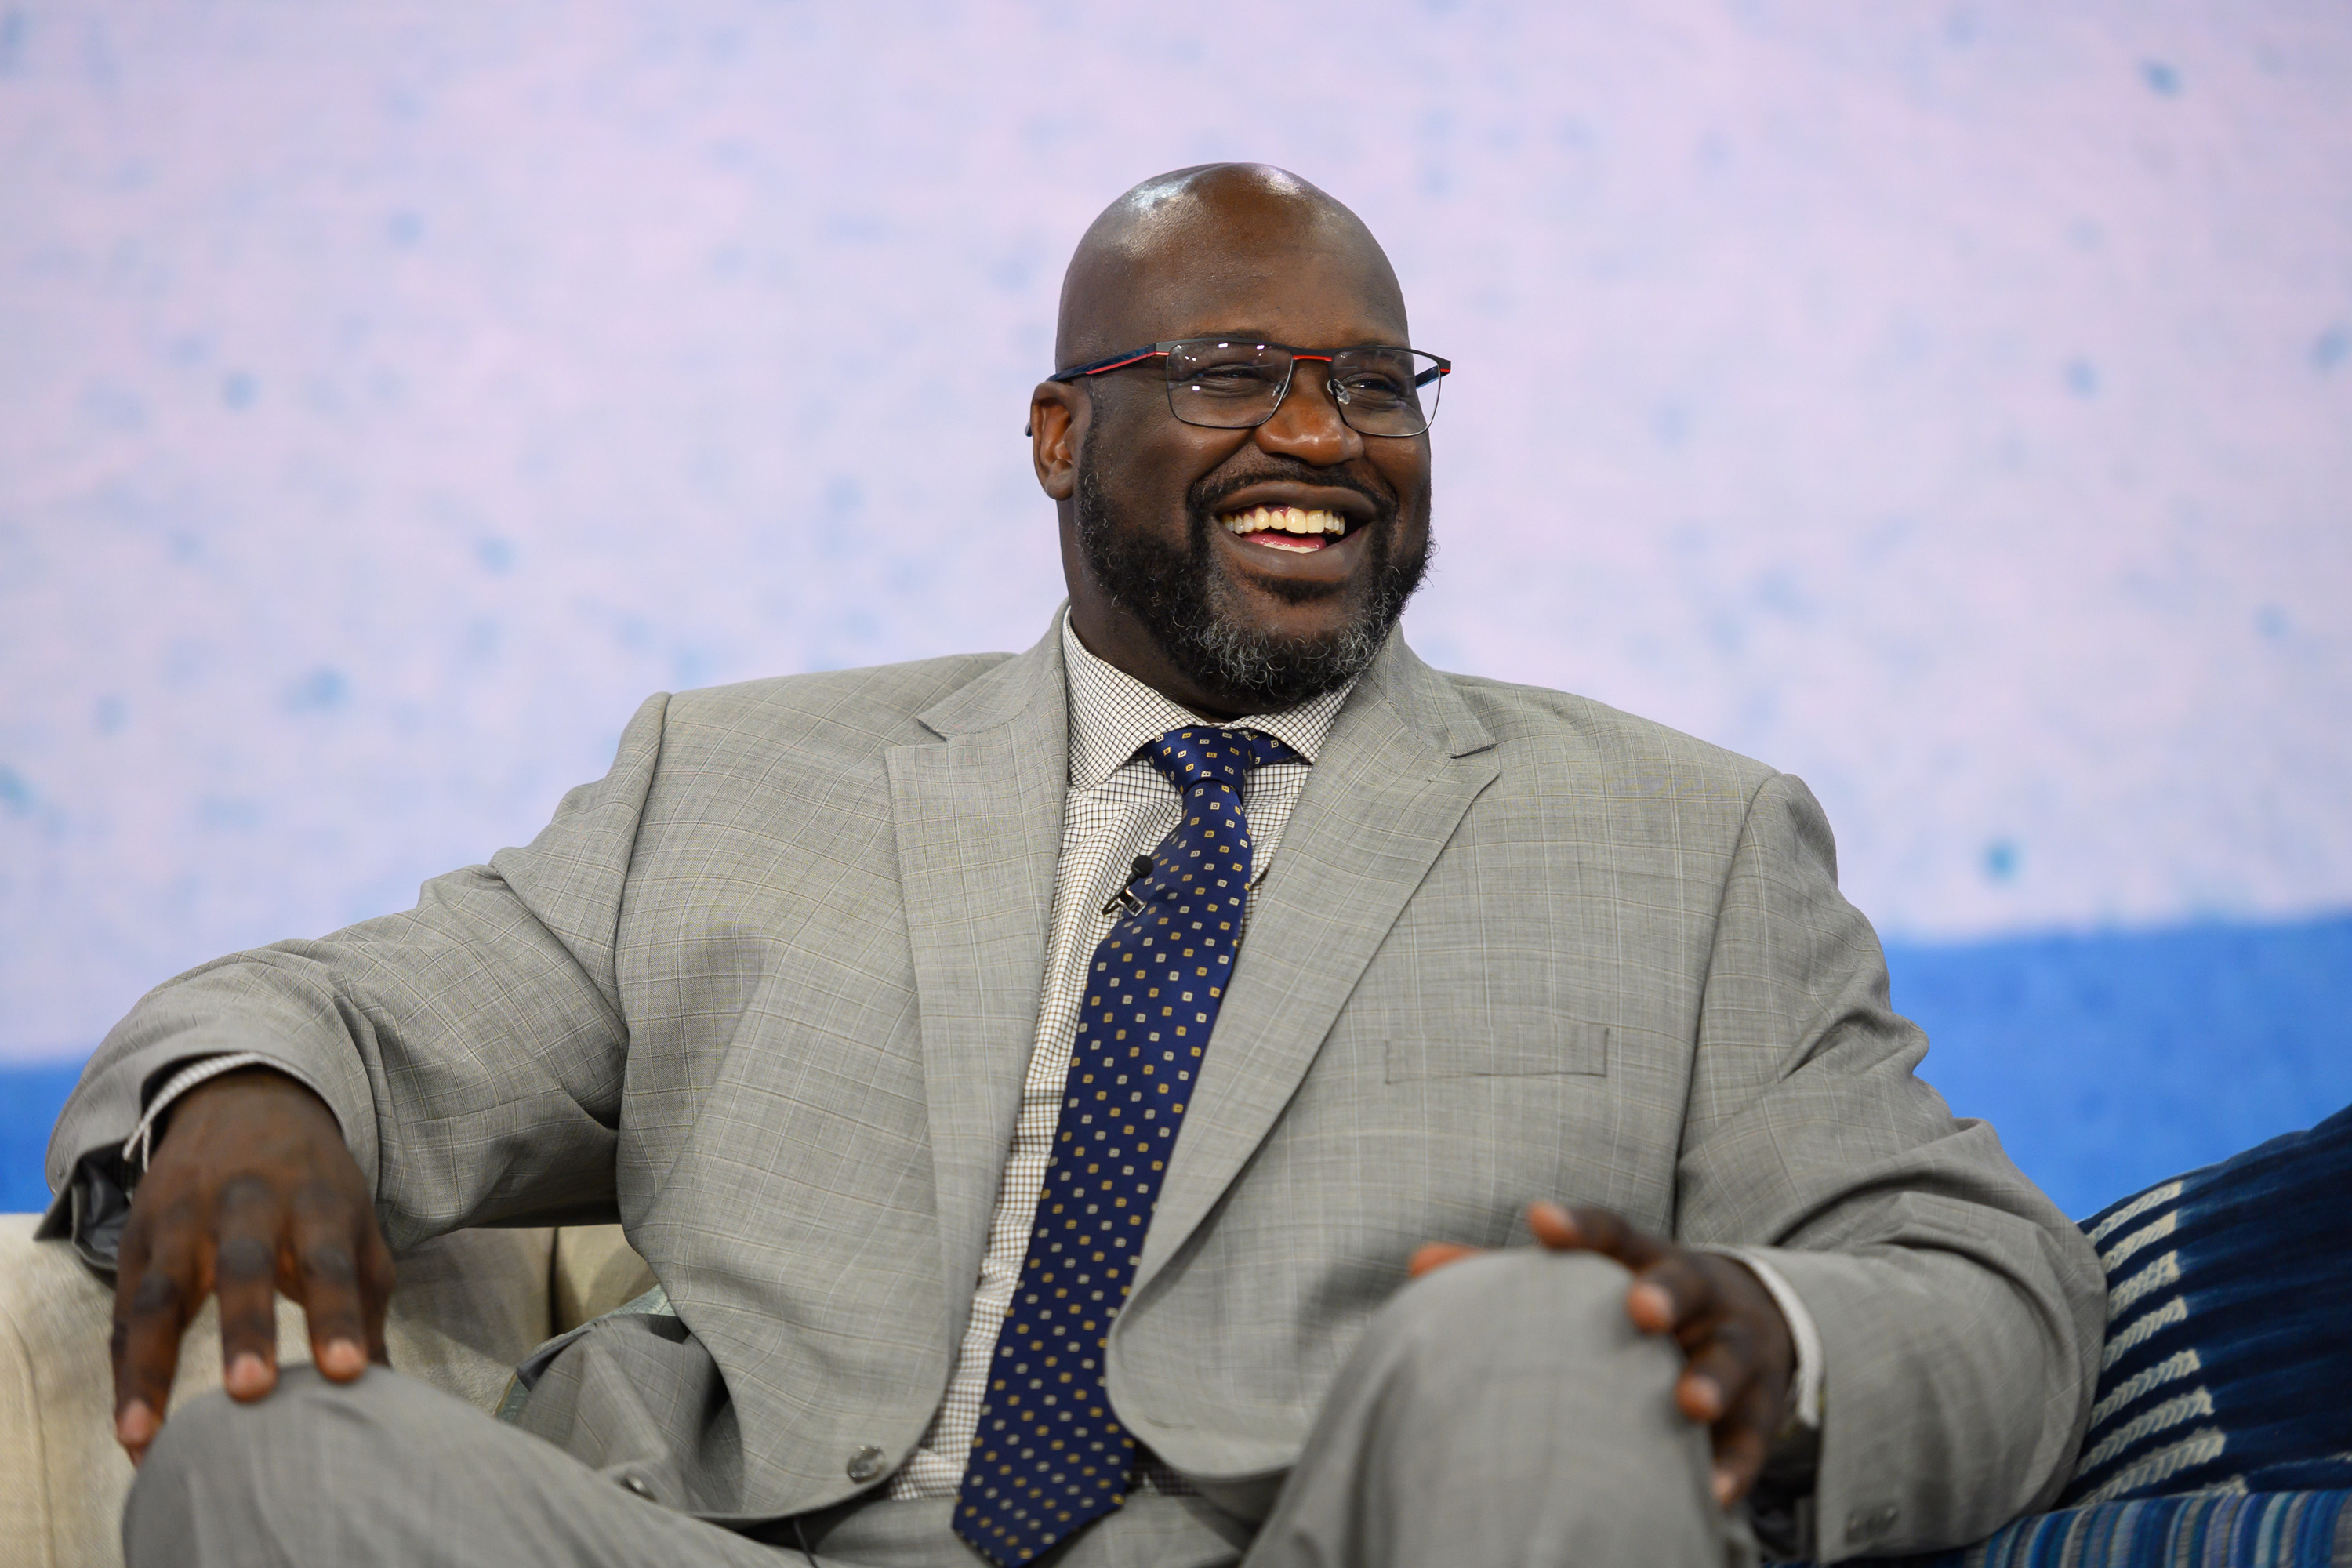 NBA player Shaquille O'Neal